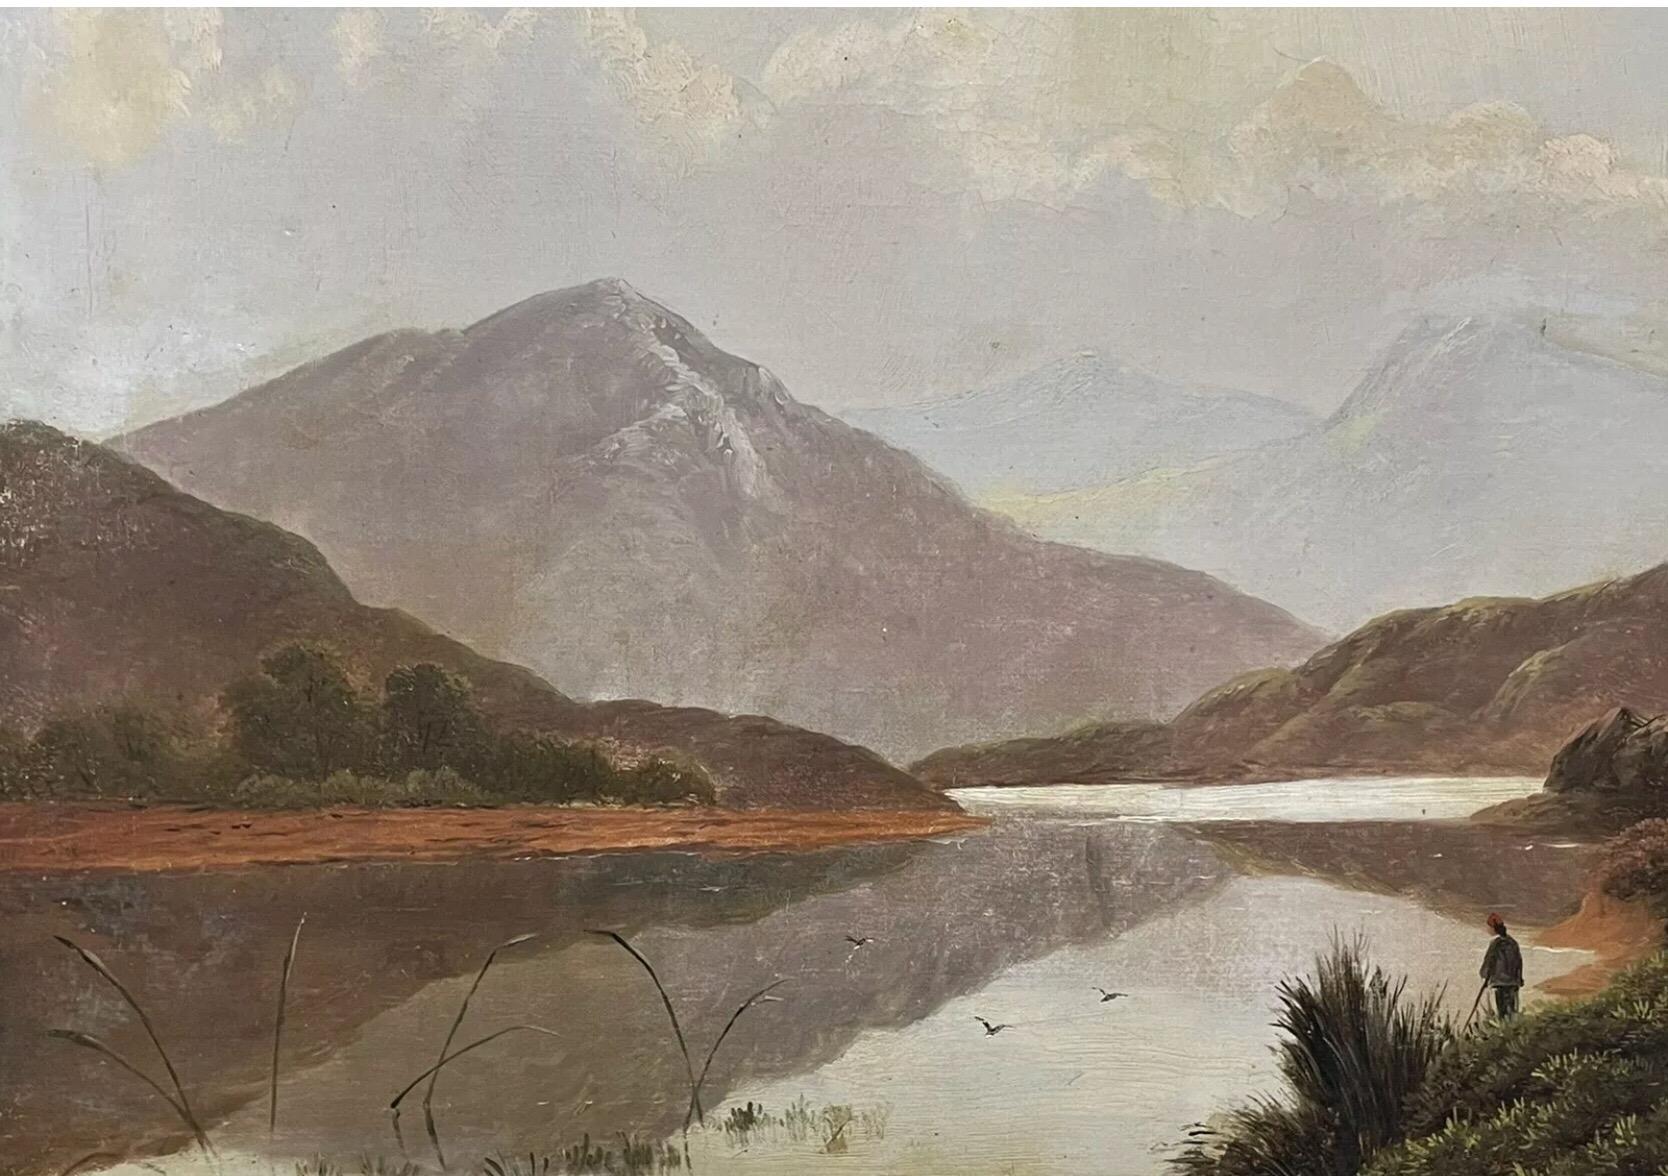 Artist/ School: Charles Leslie (British, 1839-1886), signed lower corner. 

Title: Angler in the Scottish Highlands. 

Medium: oil painting on canvas, framed.

Size:  painting: 20 x 30 inches, frame: 25.75 x 34.75 inches 

Provenance: private